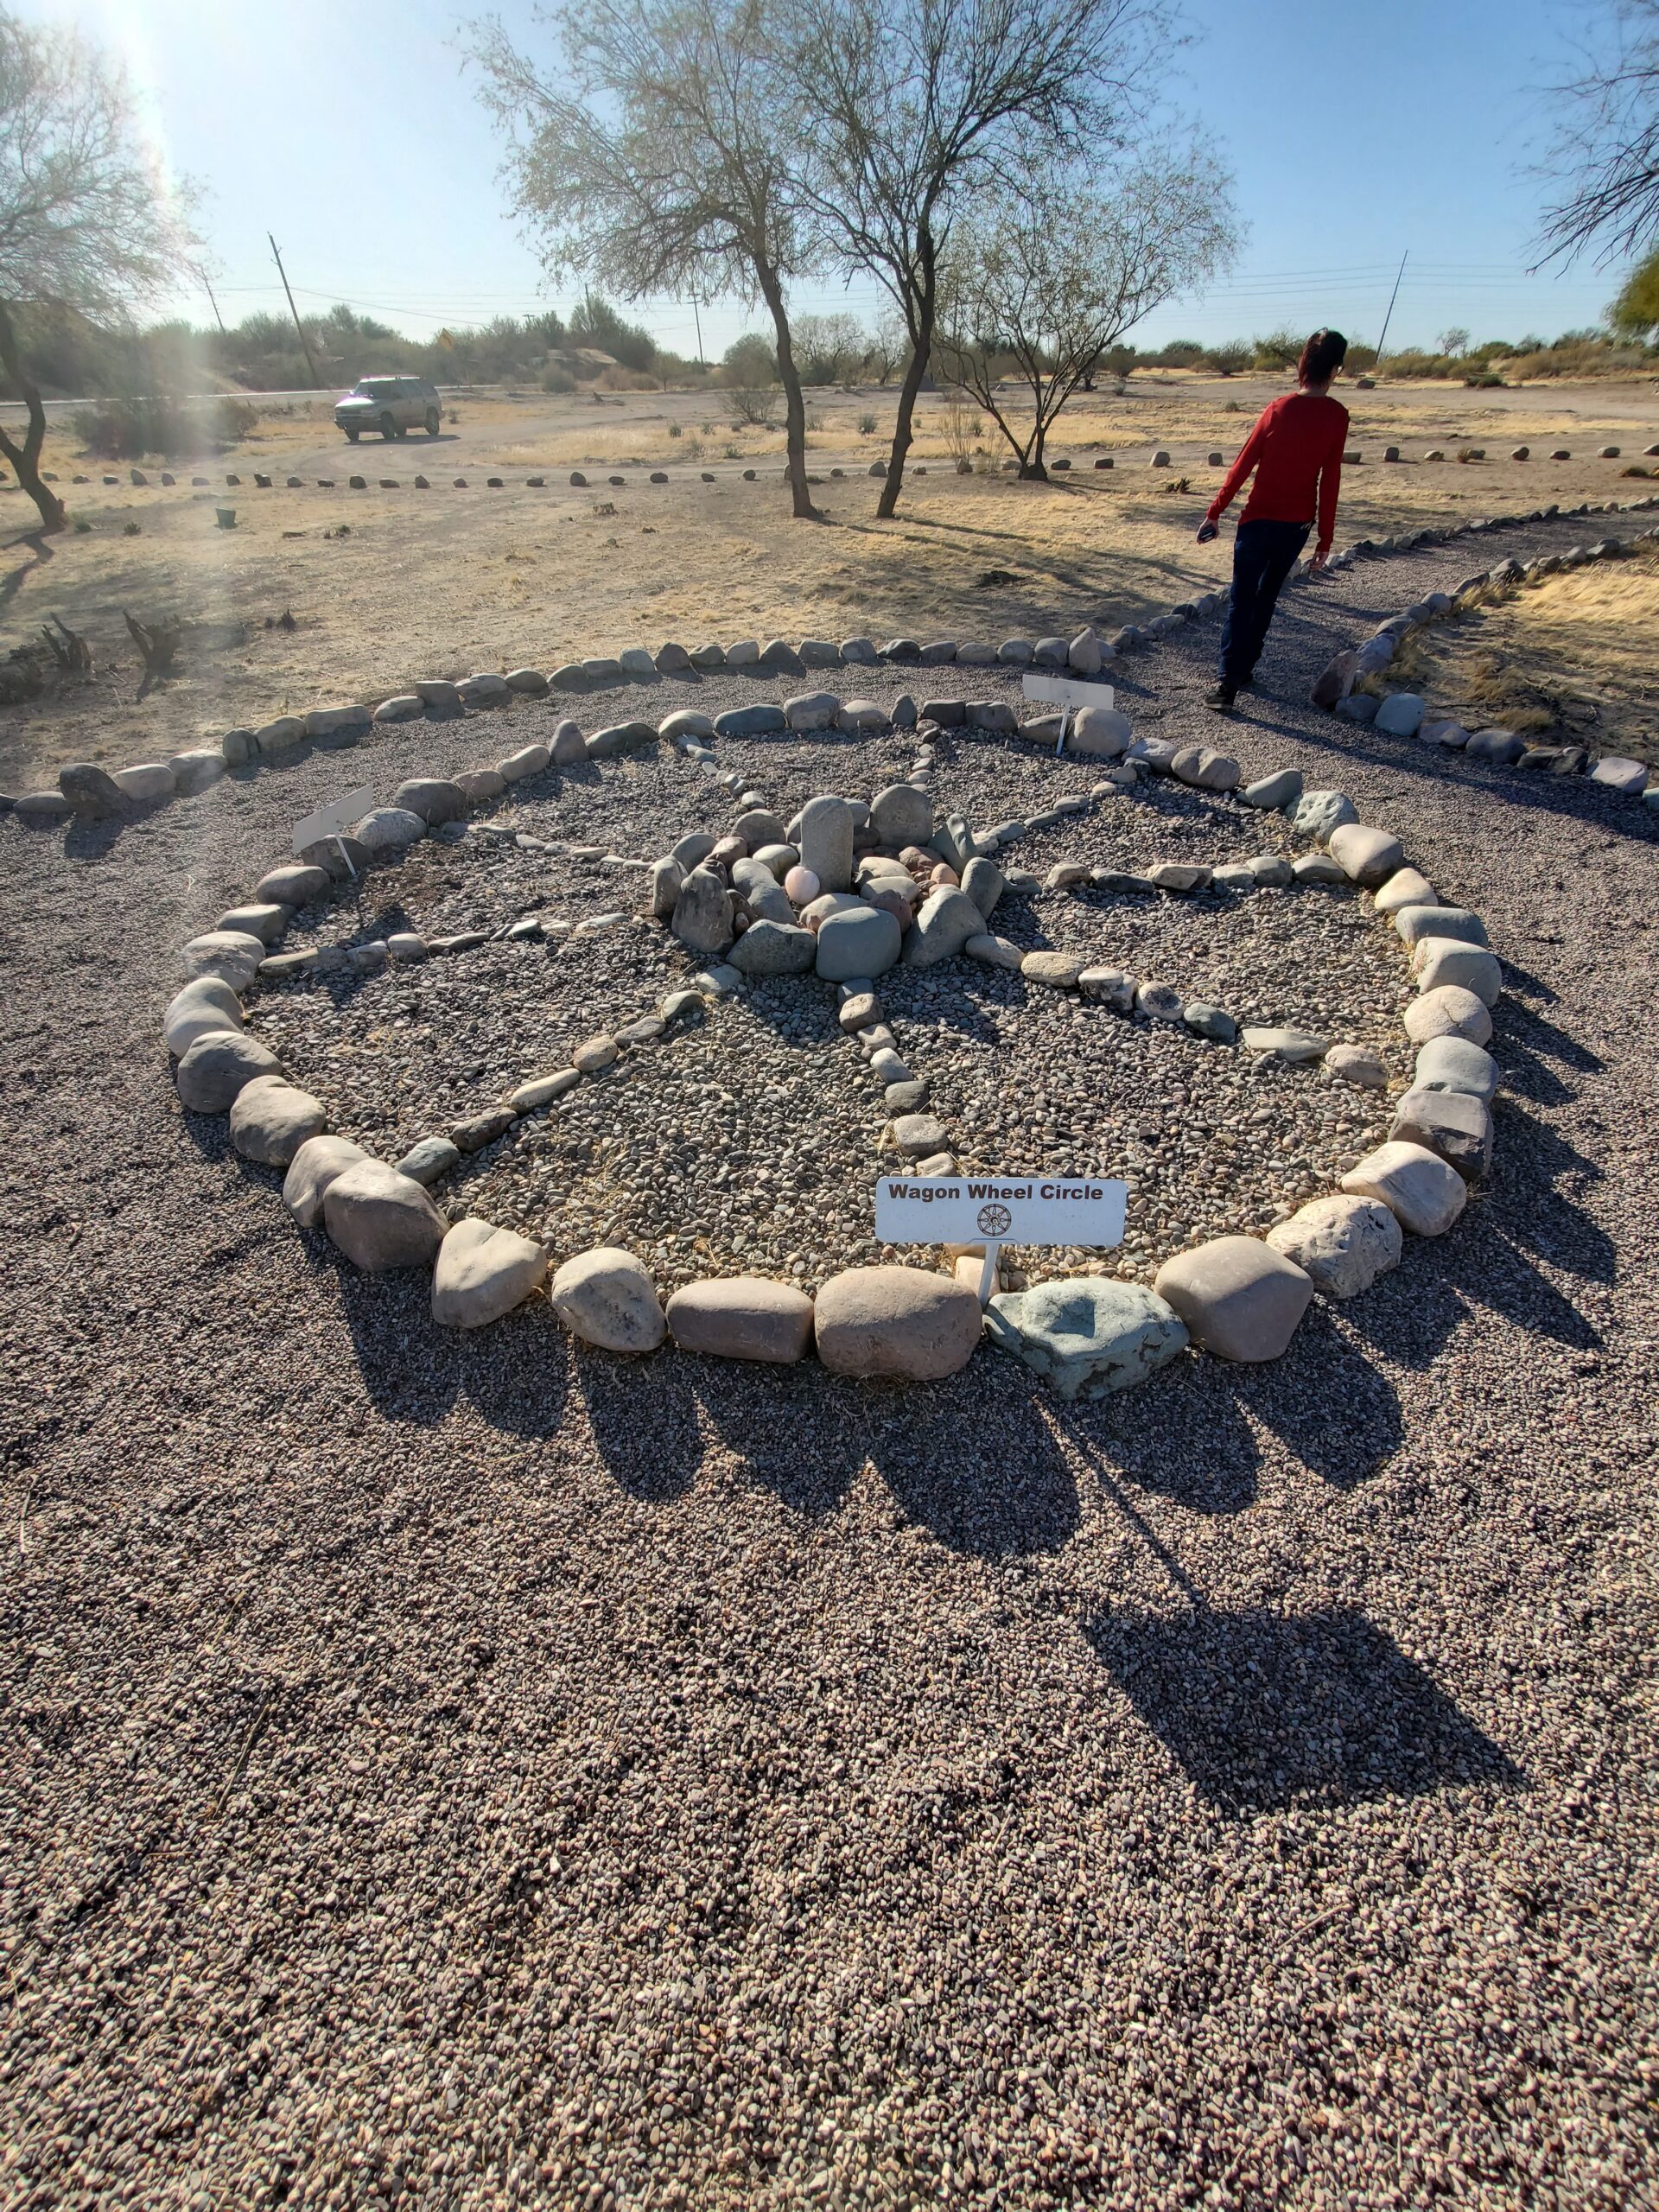 Located in Butte View is this artistic wagon wheel circle made of rocks